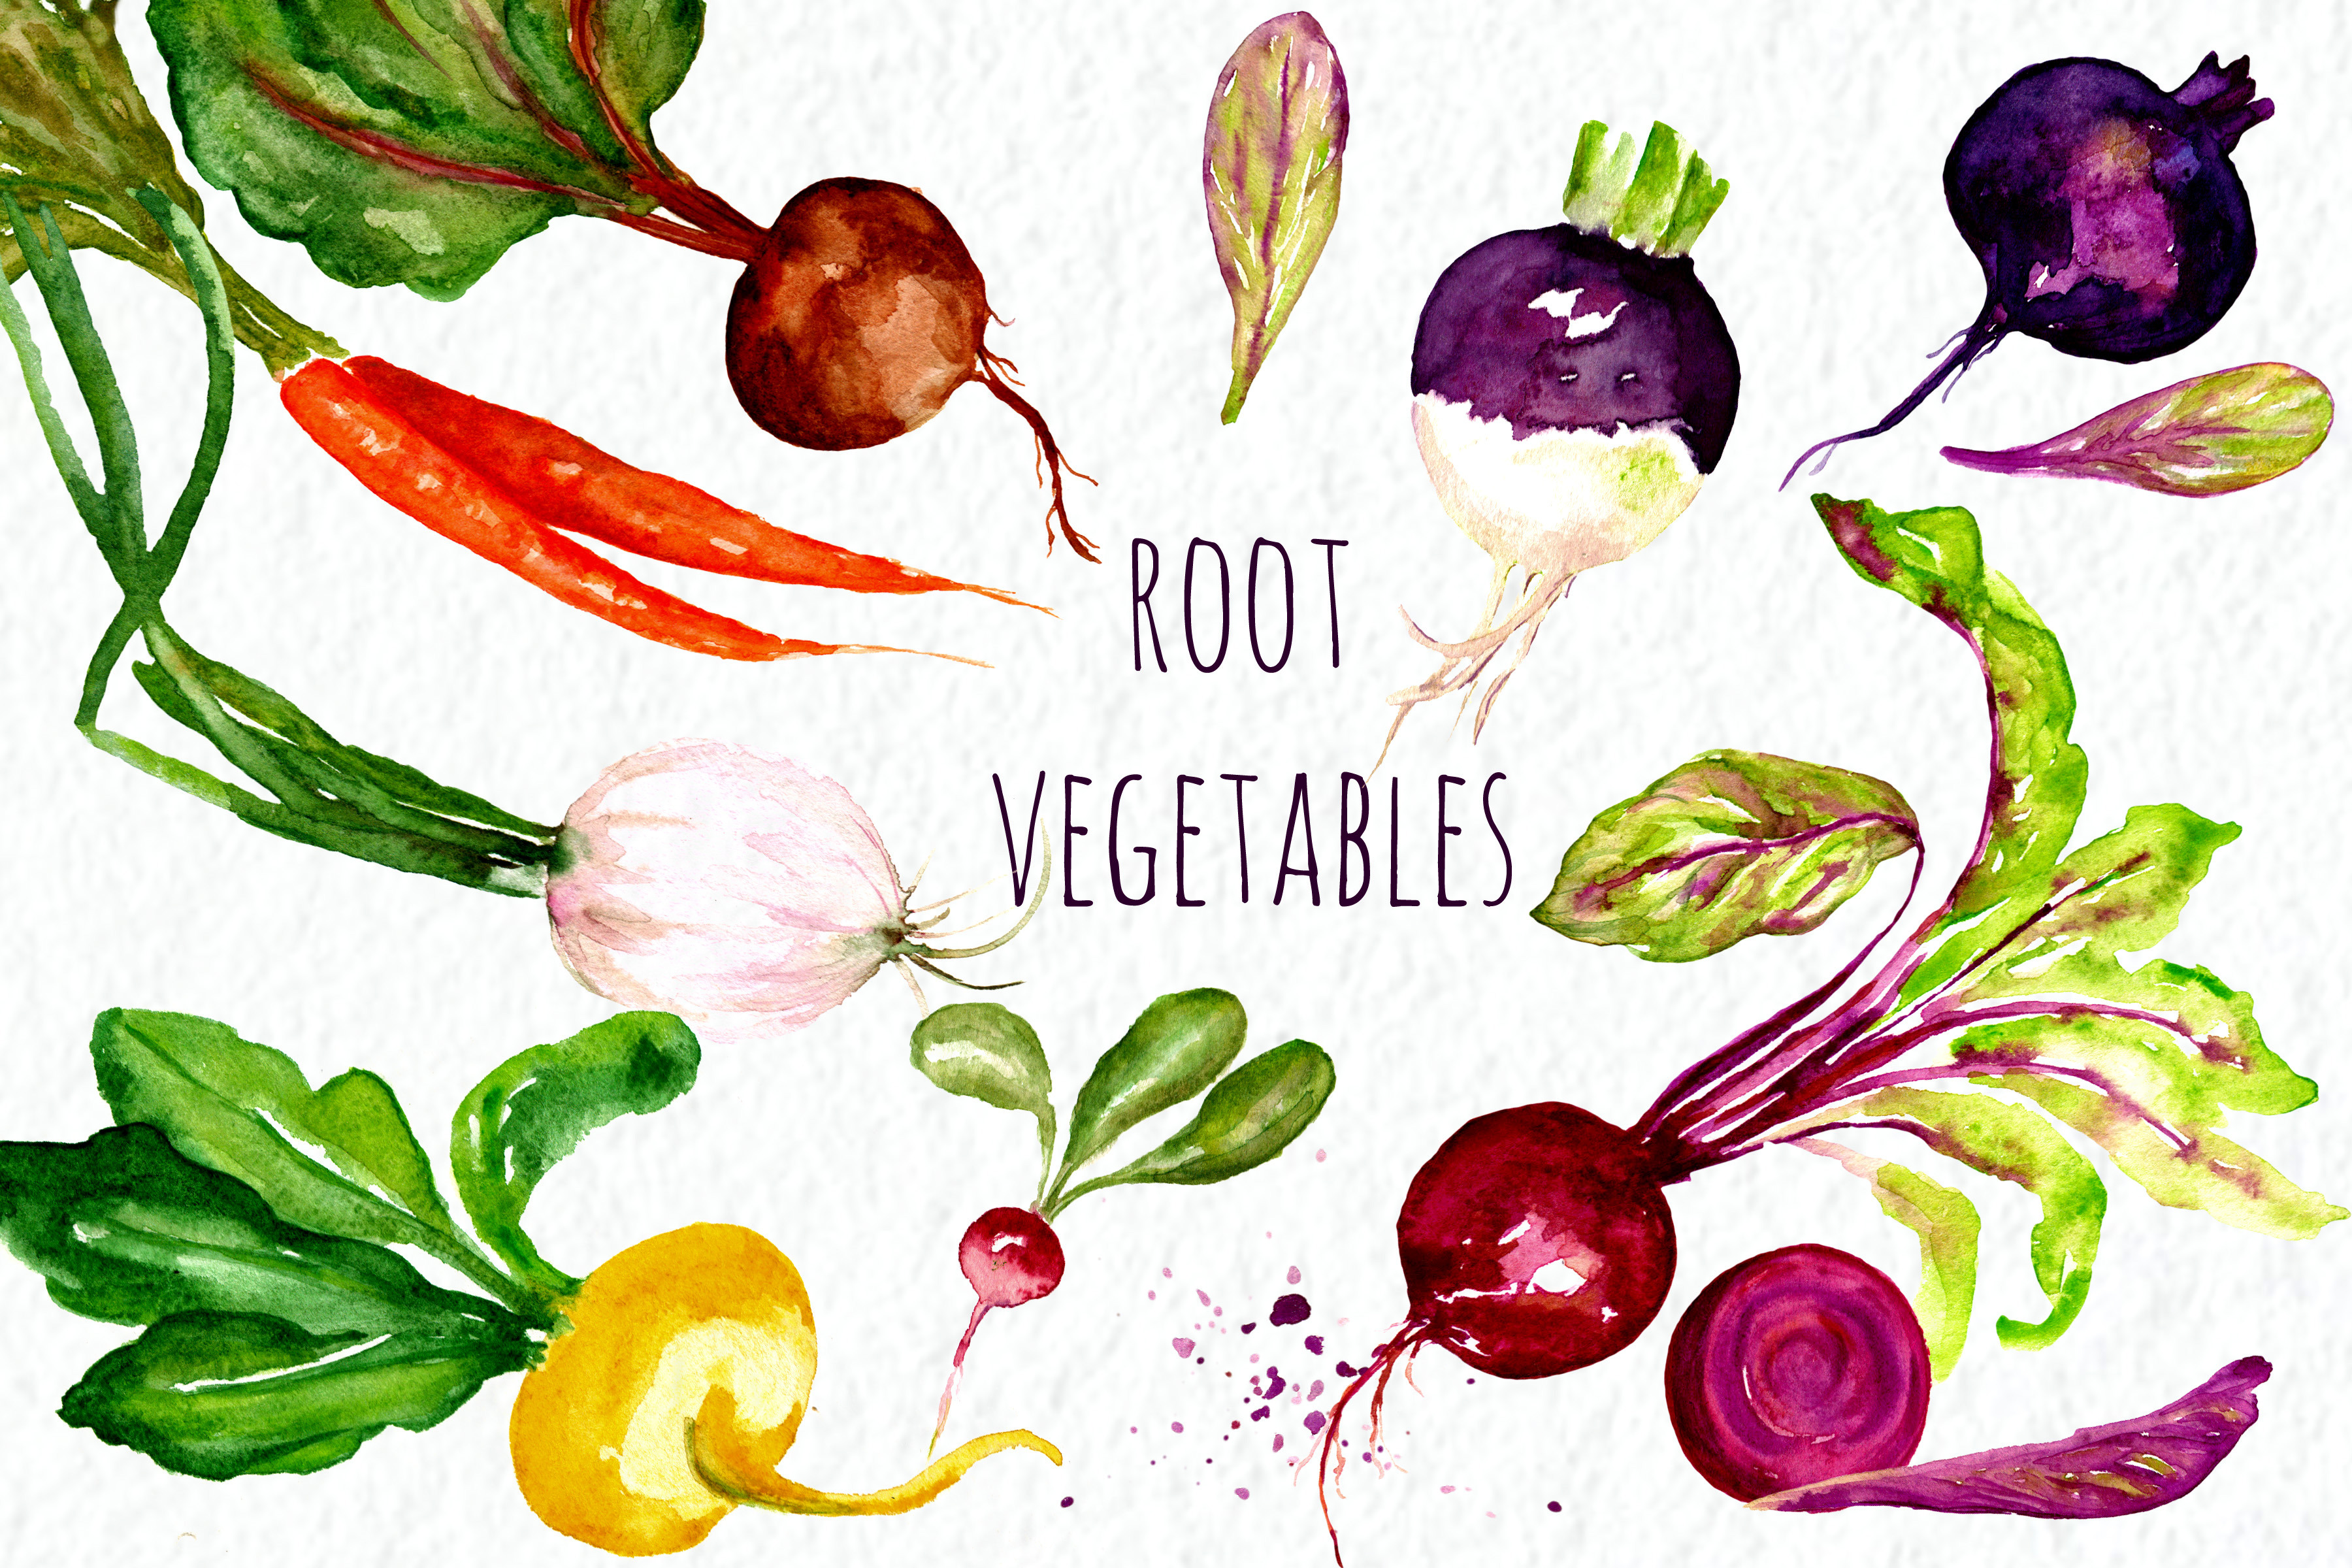 root vegetables clipart - photo #3